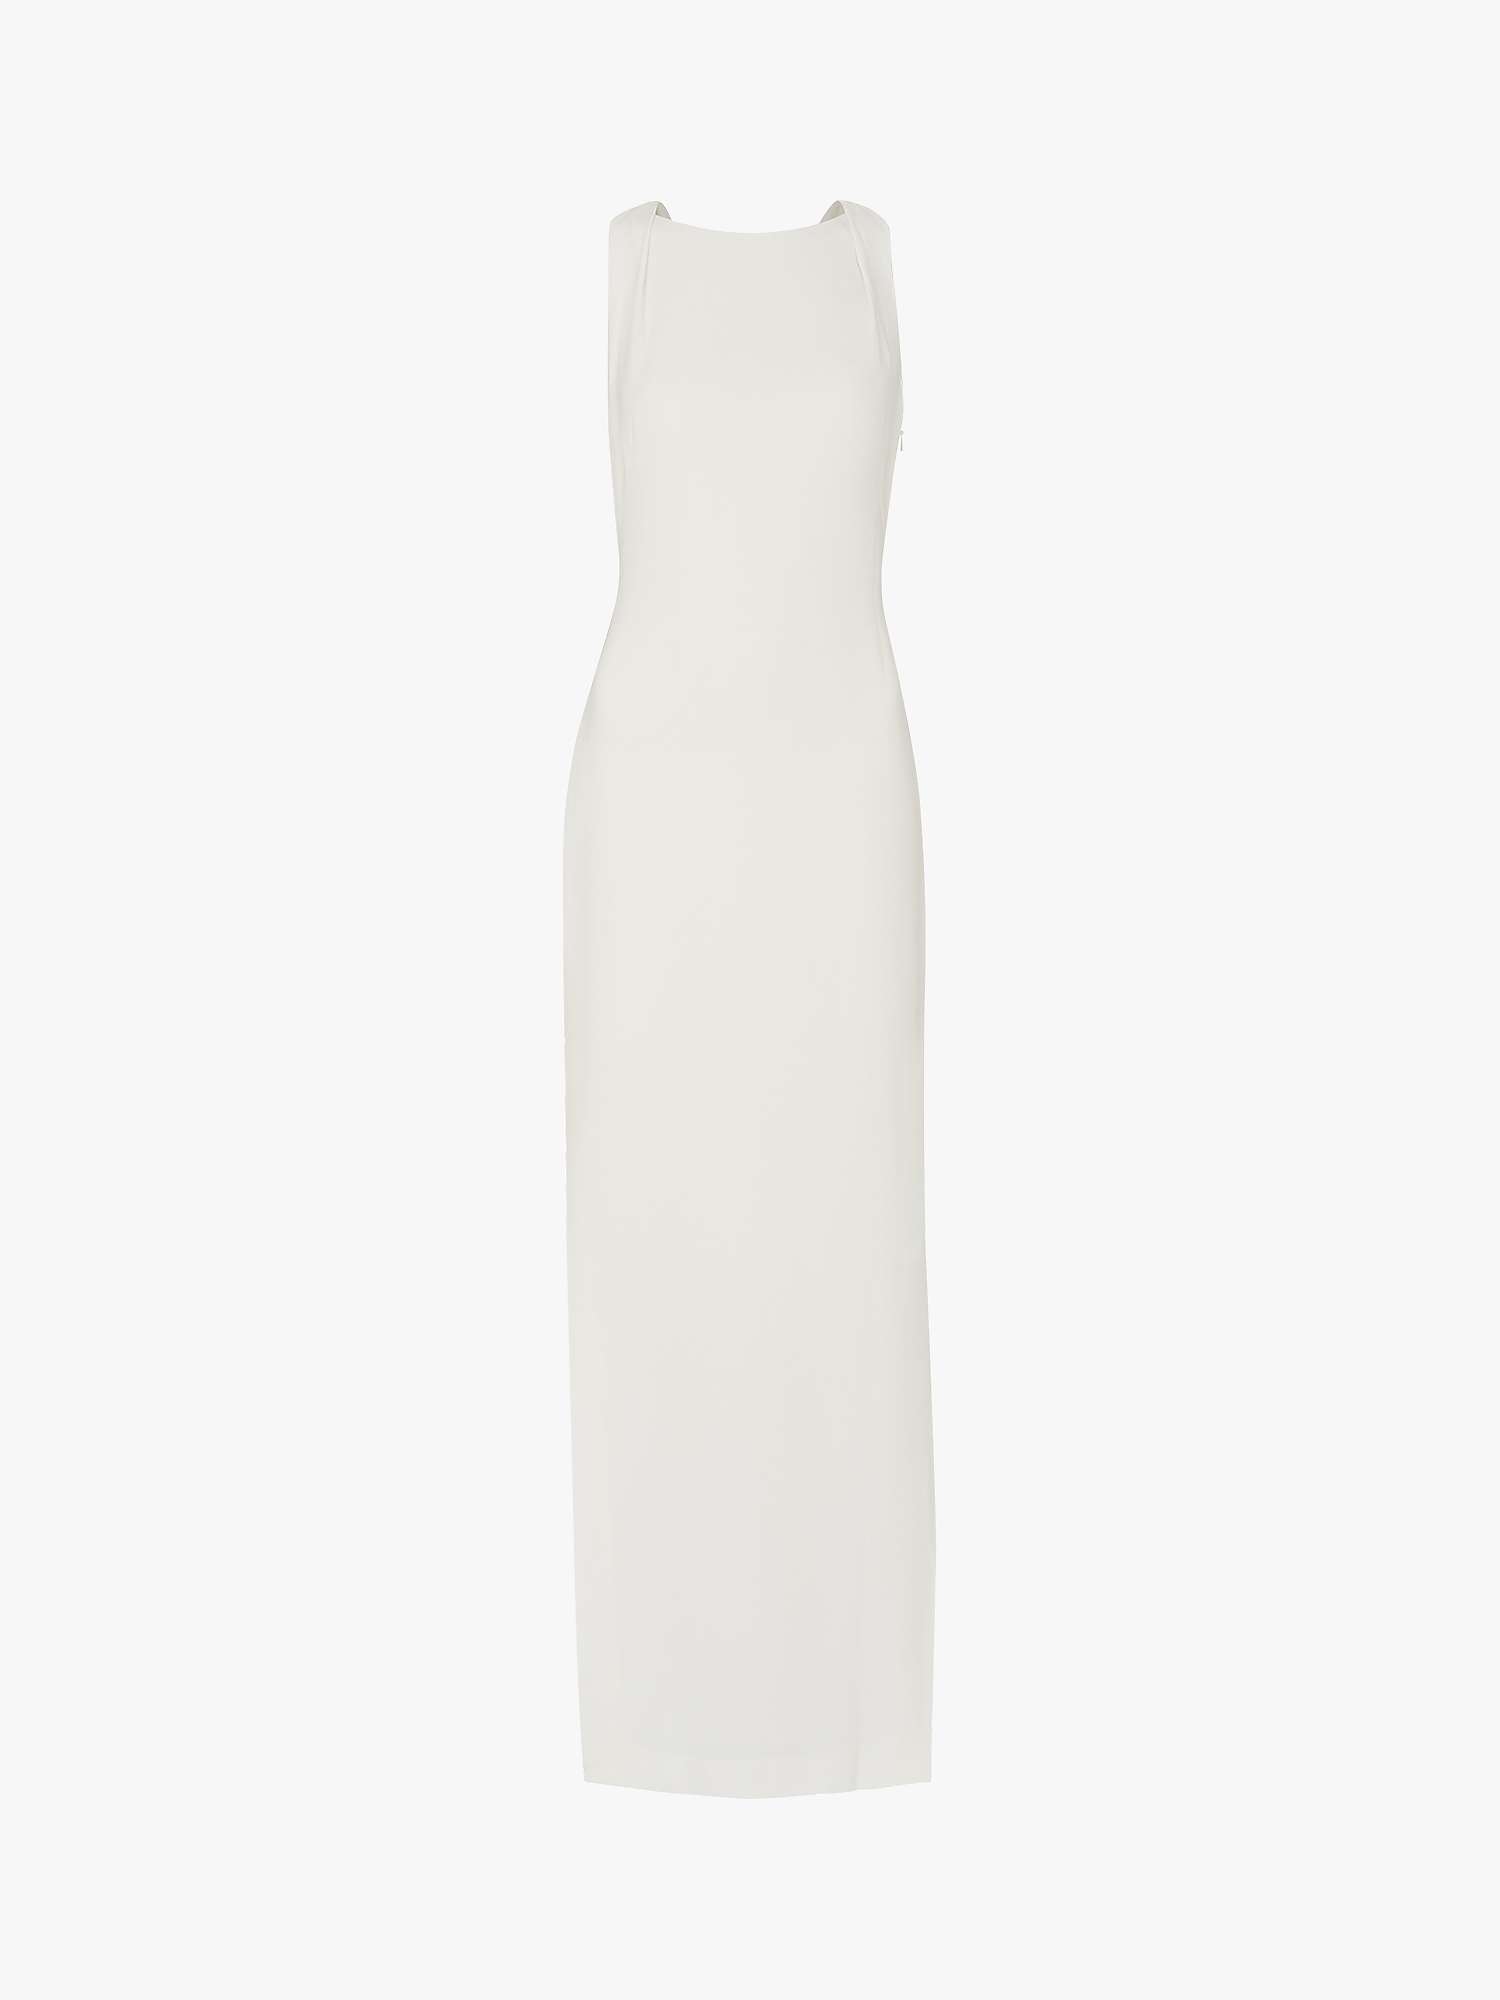 Buy Whistles Tie Back Maxi Dress, Ivory Online at johnlewis.com